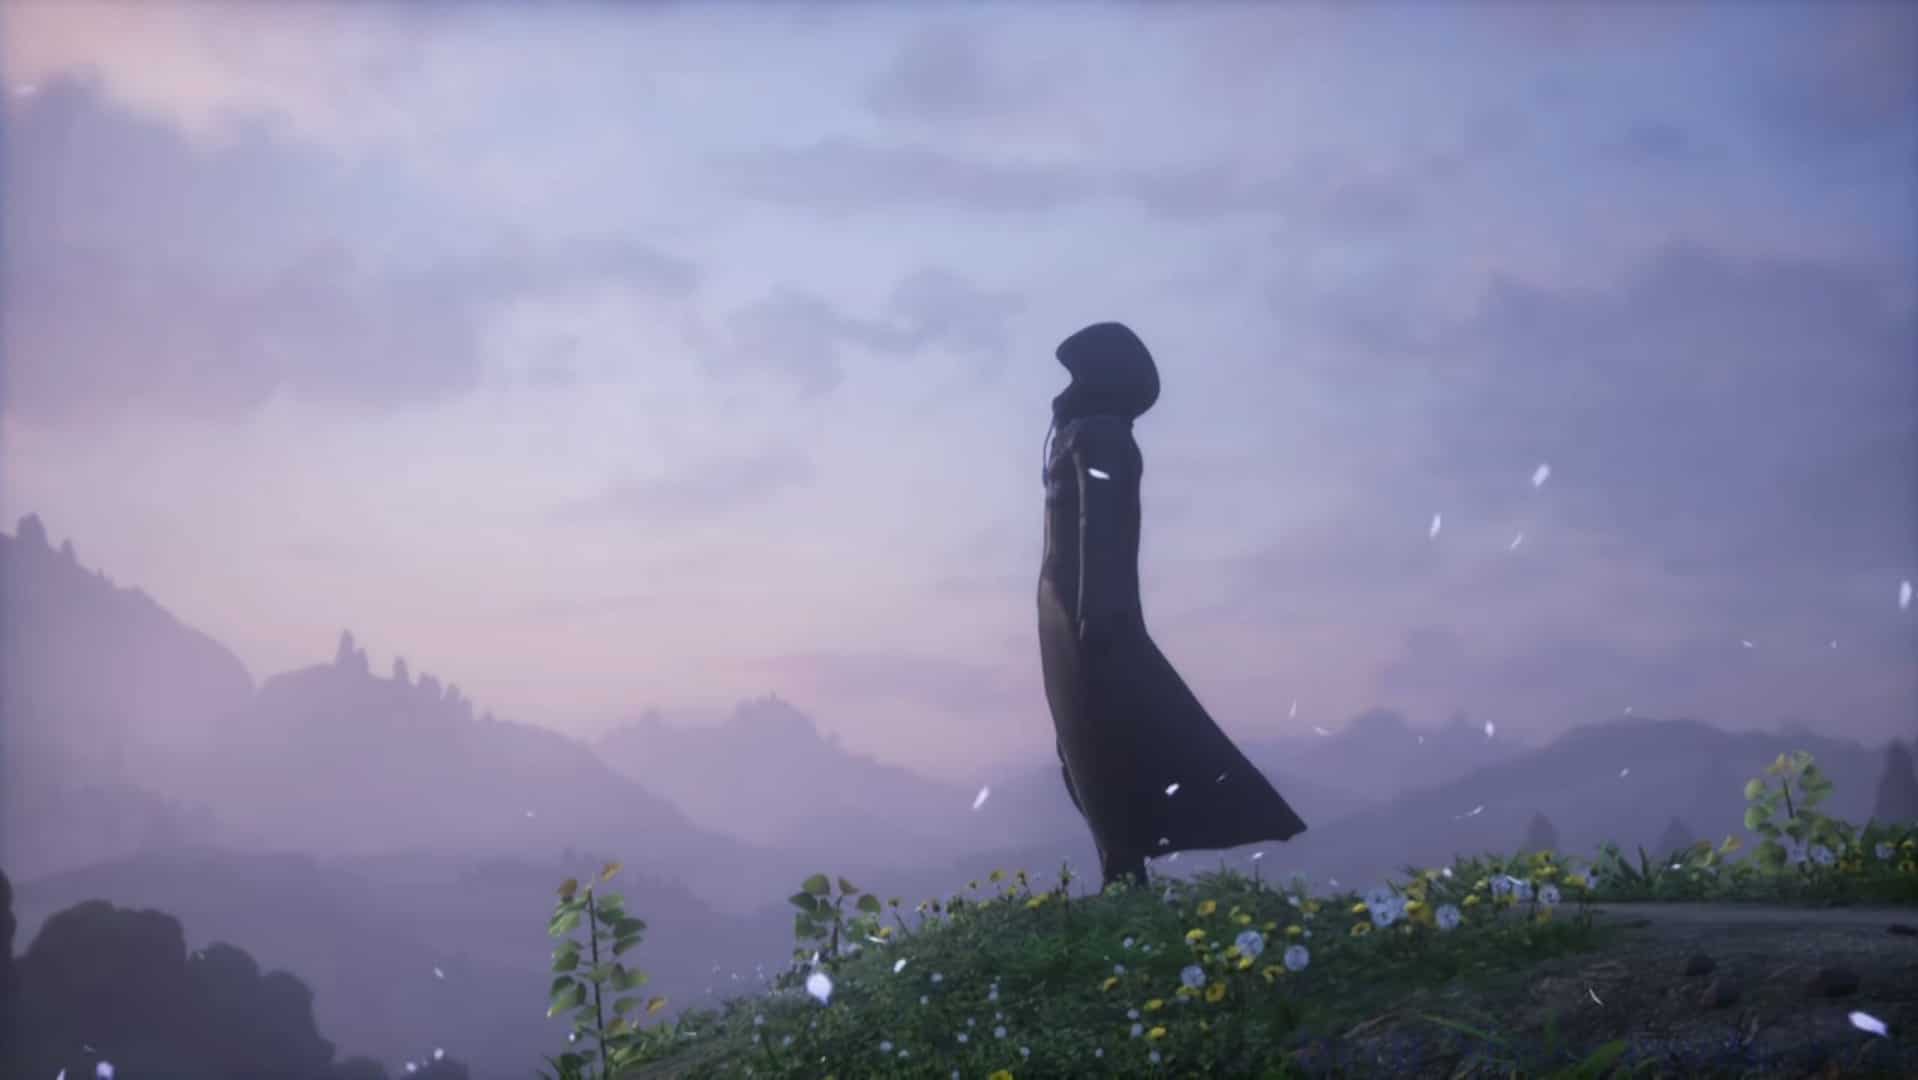 Kingdom Hearts Content Creator Explains Thought-Provoking Game Parallels To Norse Mythology